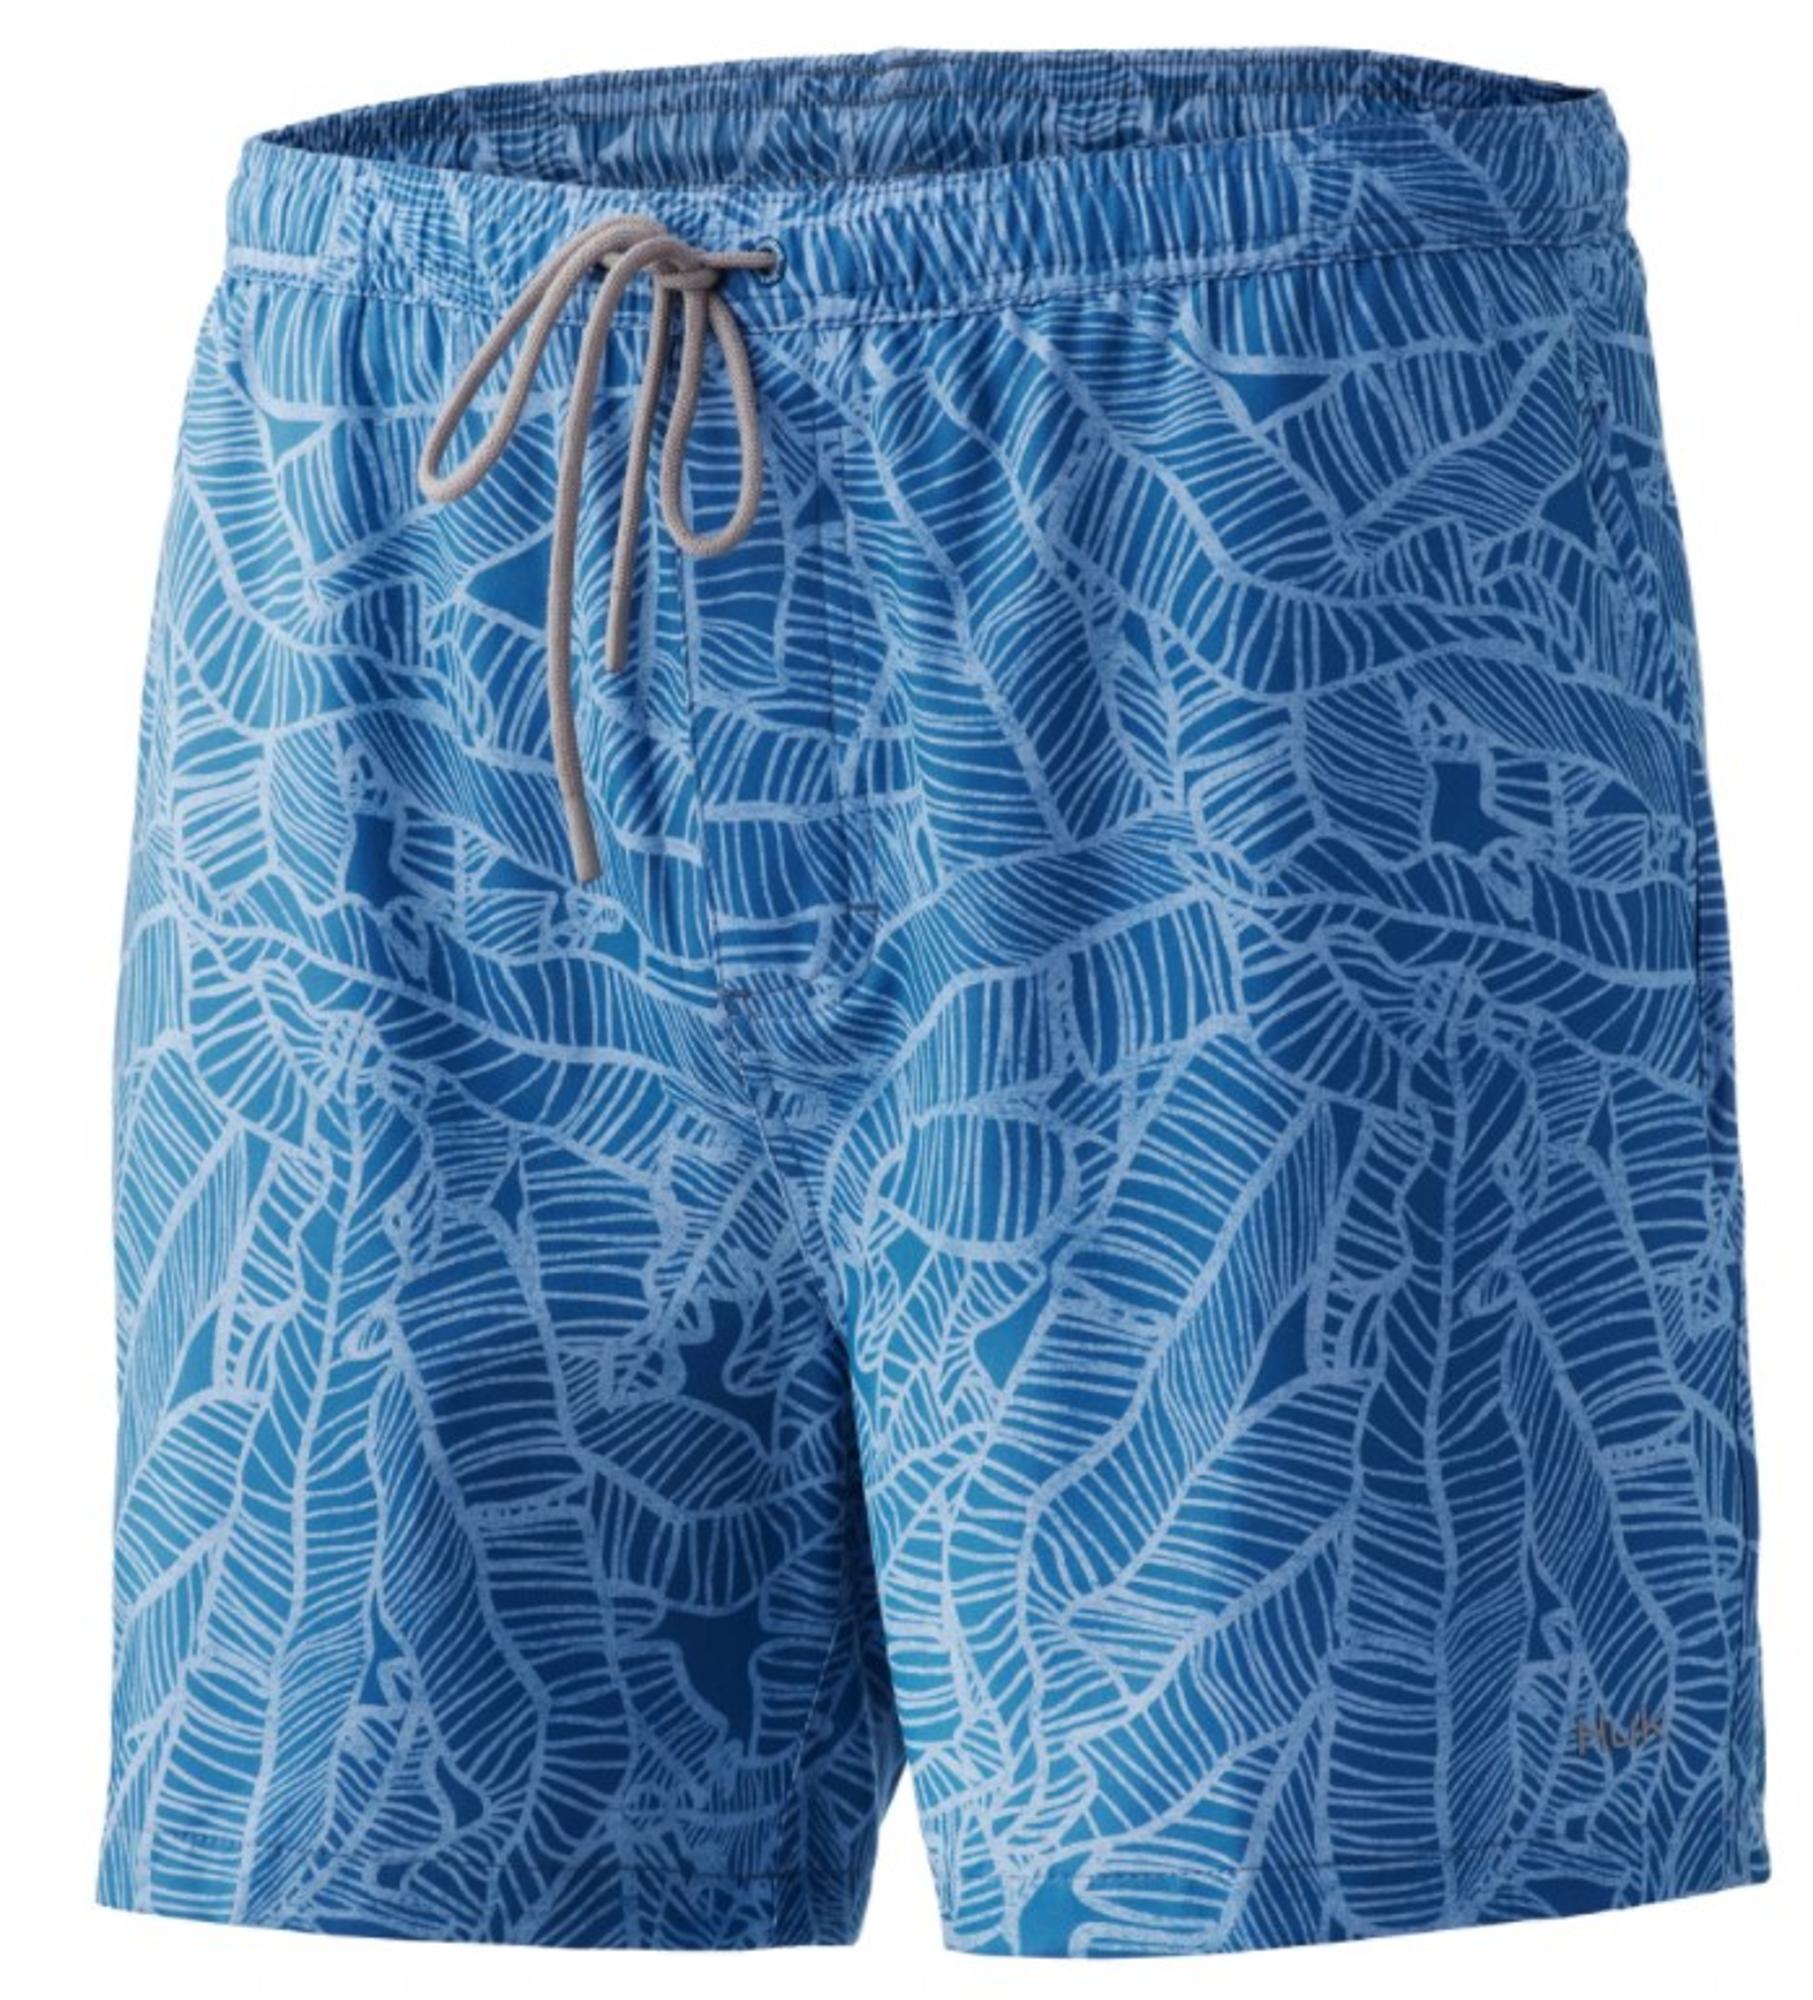 Pursuit Lined Volley Swim Shorts